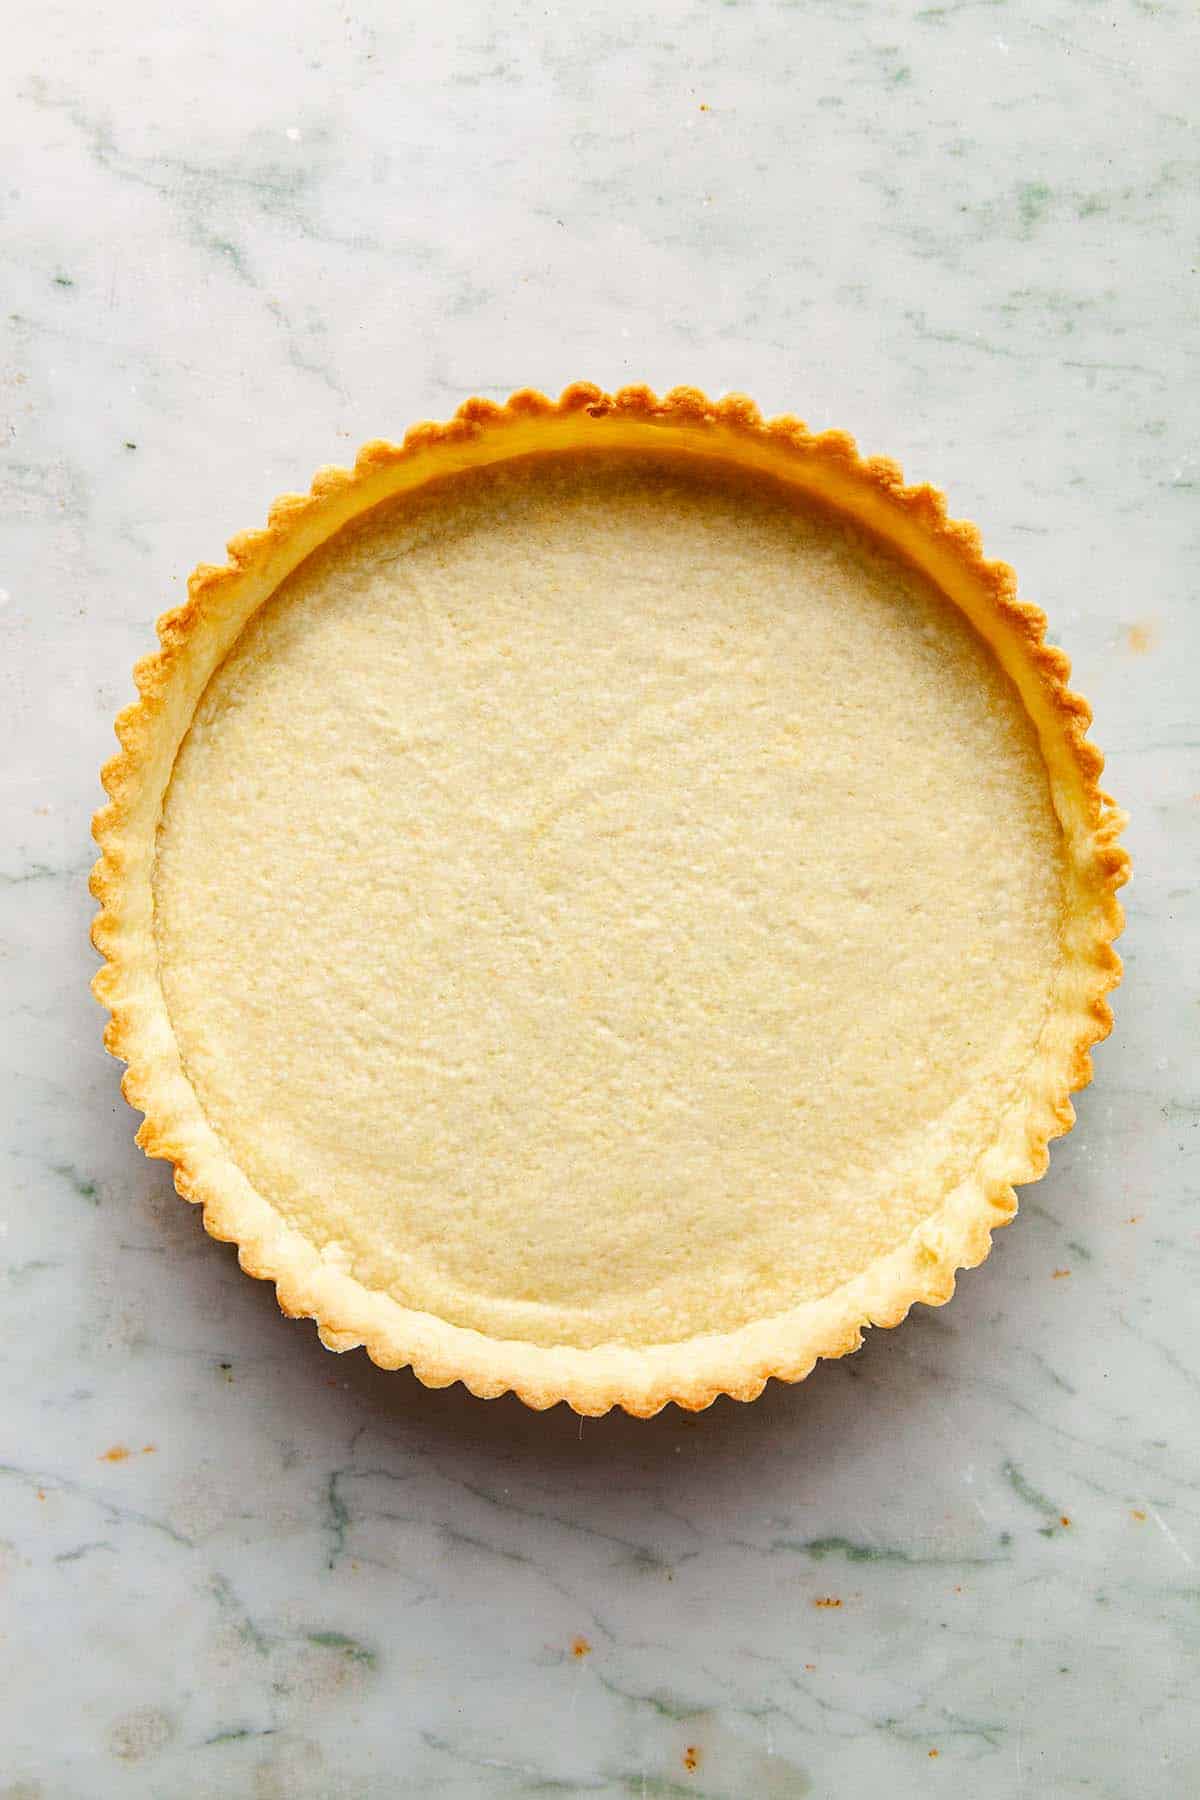 A shortcrust pastry that's been par-baked.